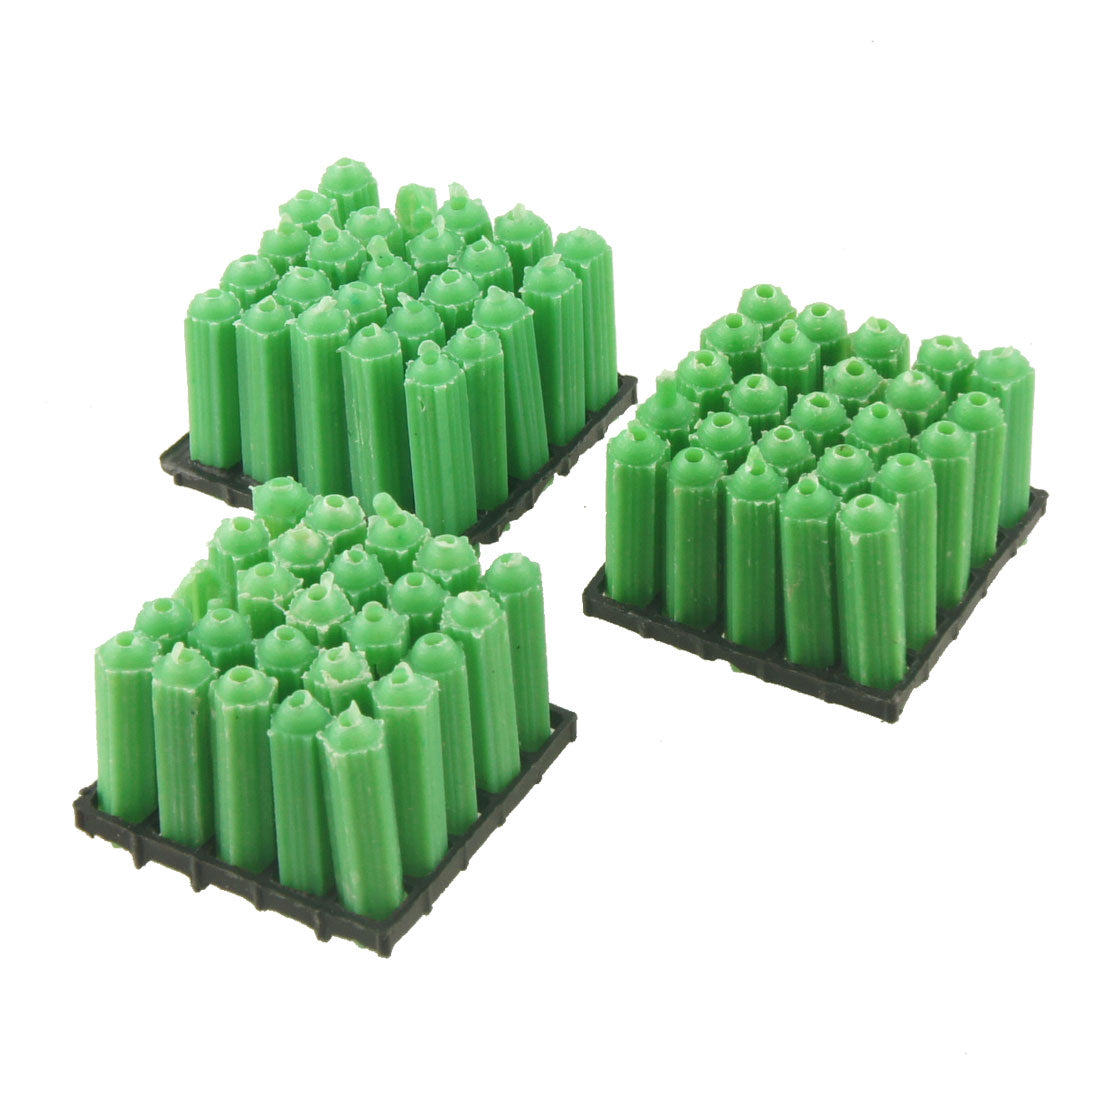 uxcell Uxcell 75 Pcs 7mm x 27mm Green Plastic Fixing Wall Connector for 2-4mm Screws